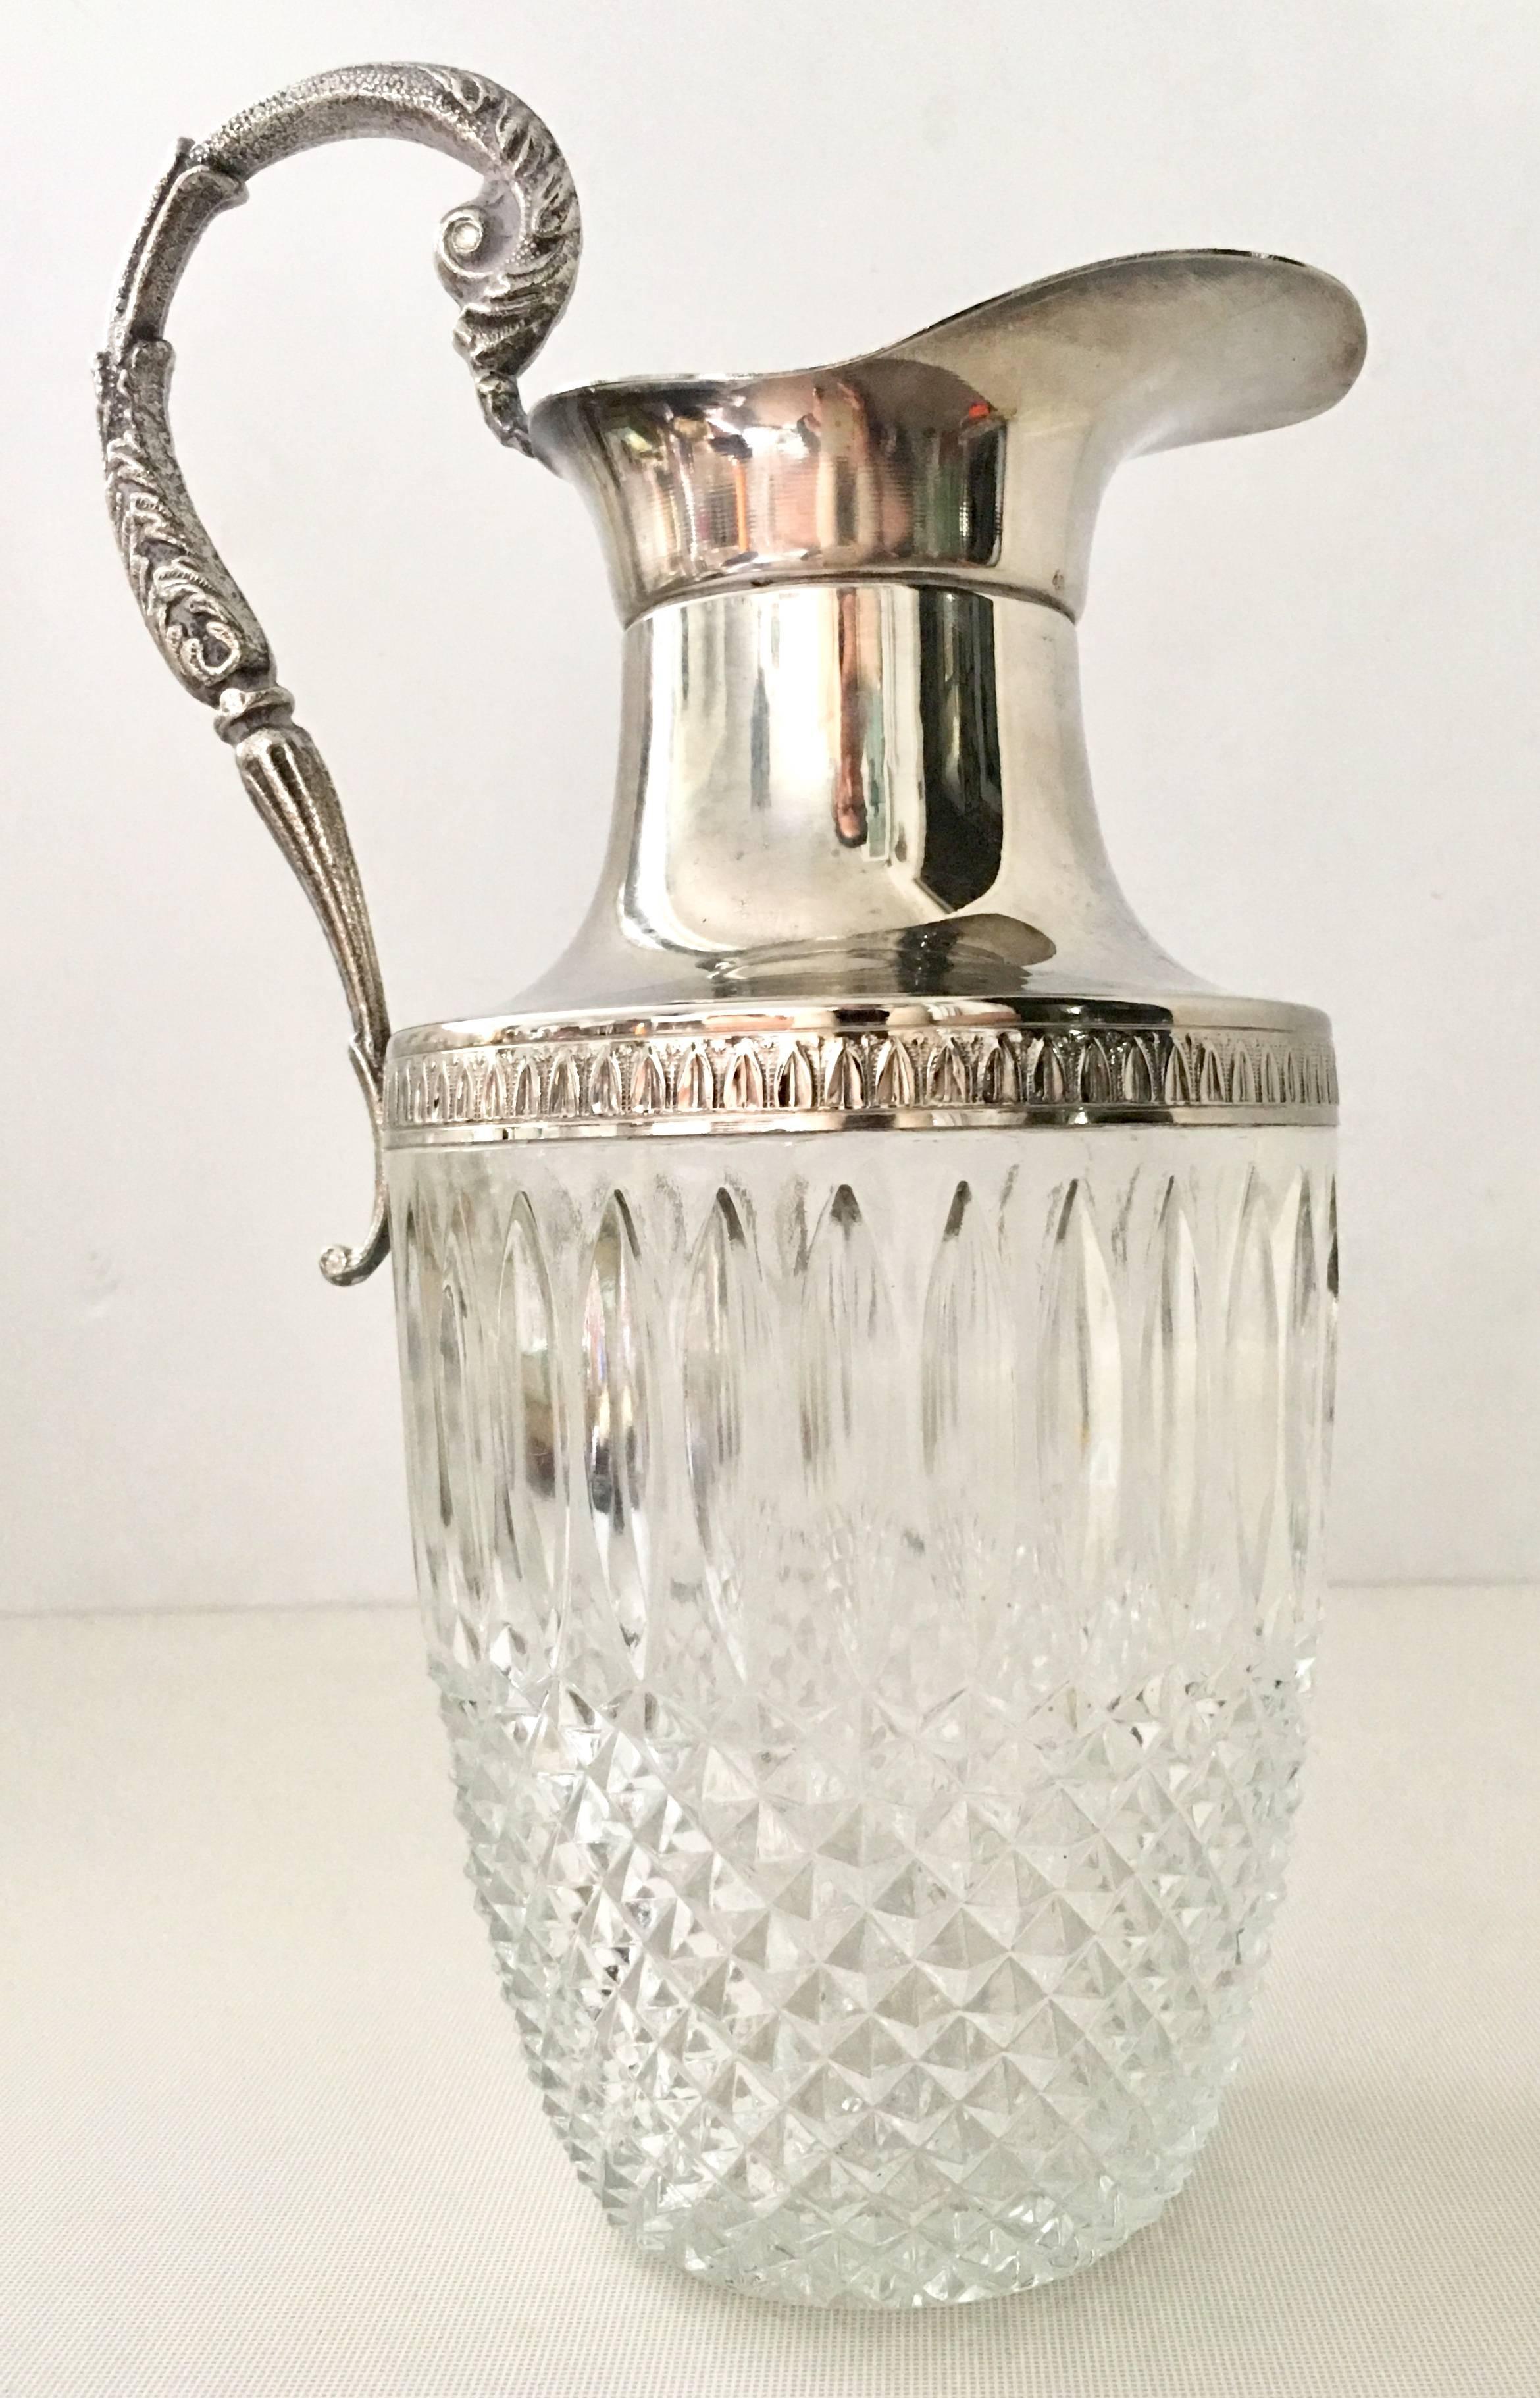 Vintage Georgian style silver plate and cut crystal beverage pitcher. Features a perforated drain at the spout.